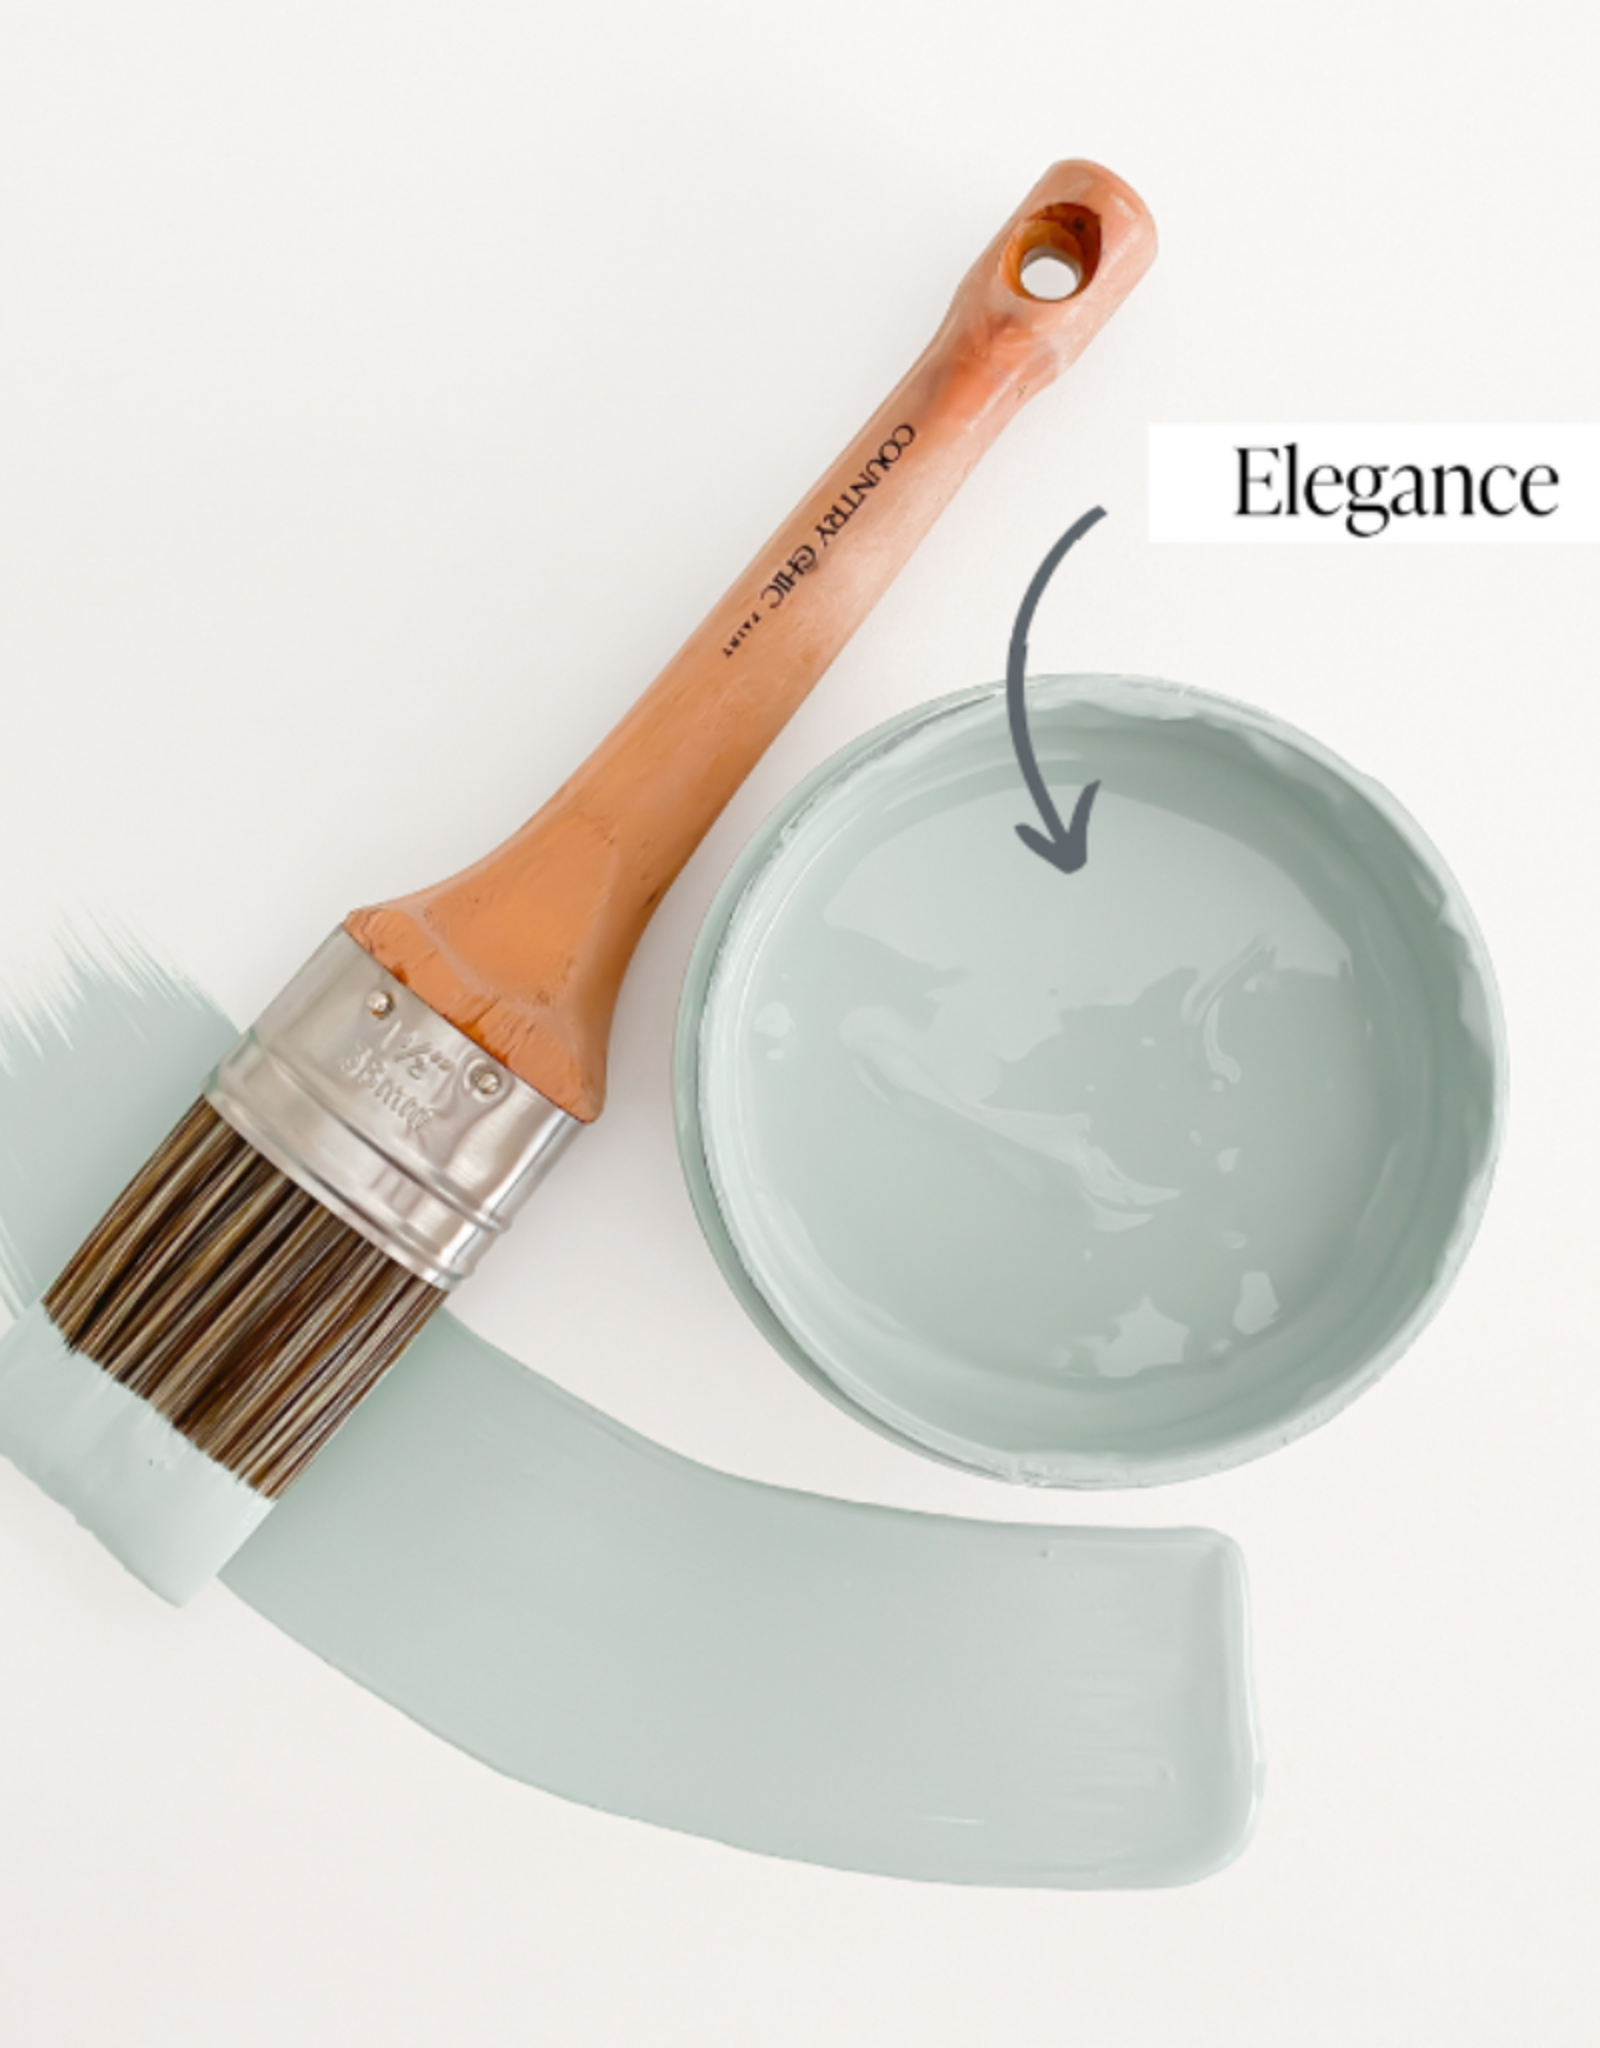 Country Chic Country Chic Paint Sample - 4oz Elegance